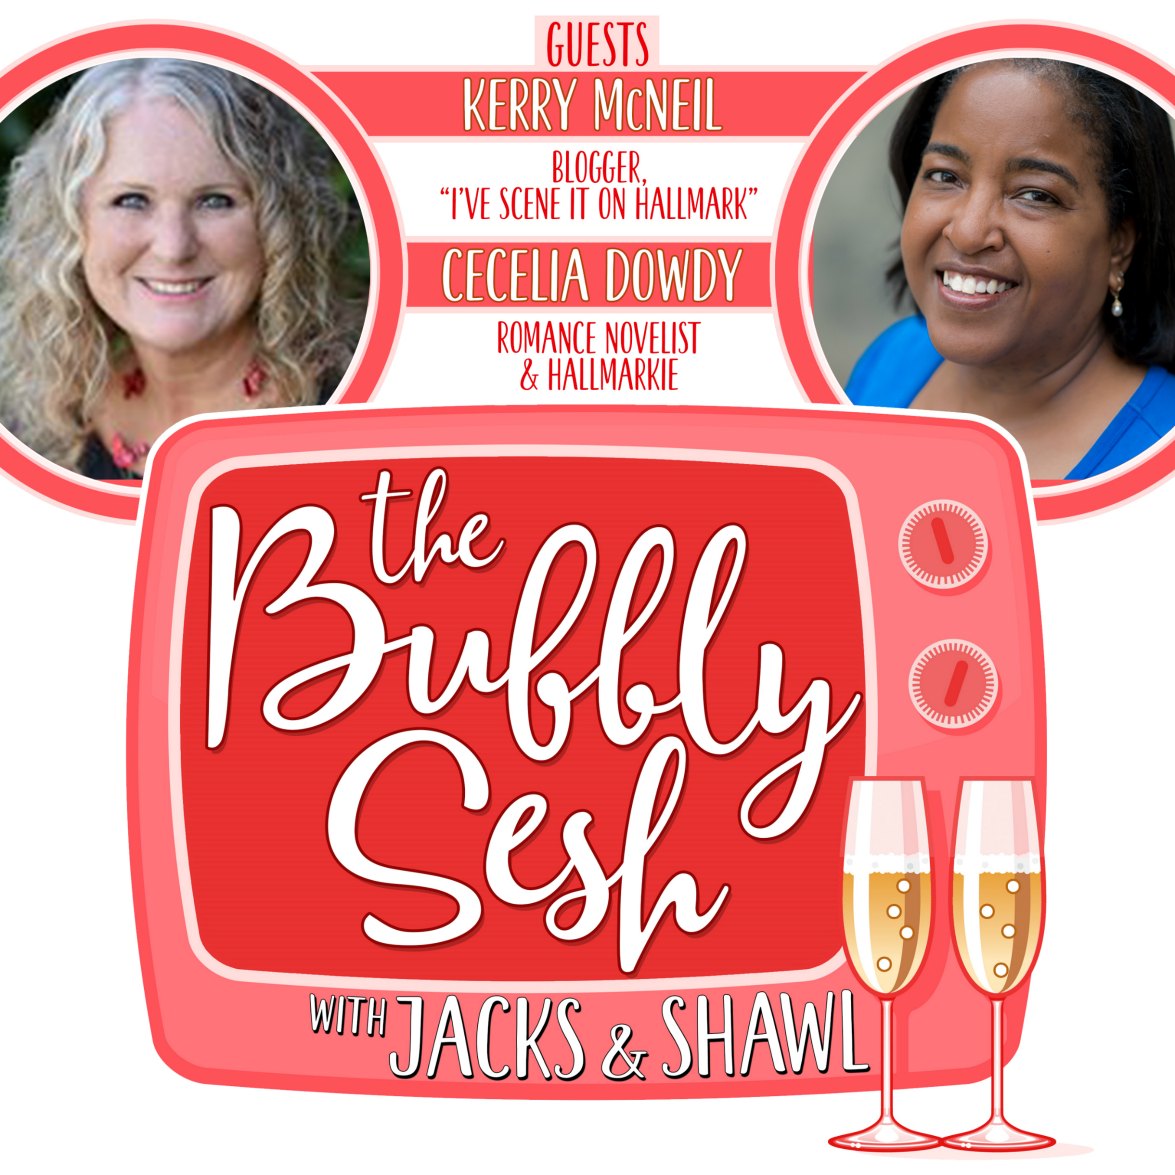 Guest Kerry McNeil of I've Scene It On Hallmark on The Bubbly Sesh podcast